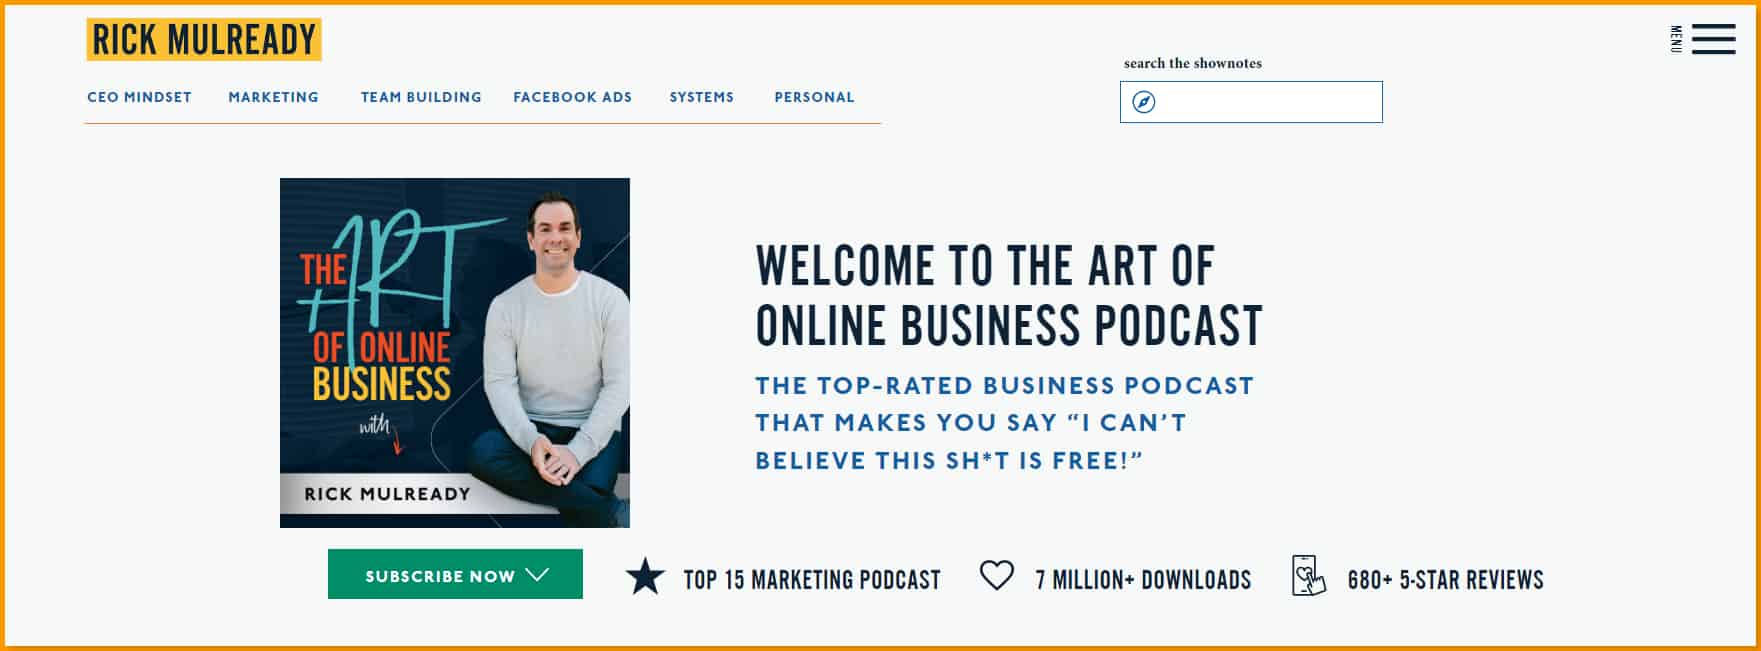 The Art of Online Business